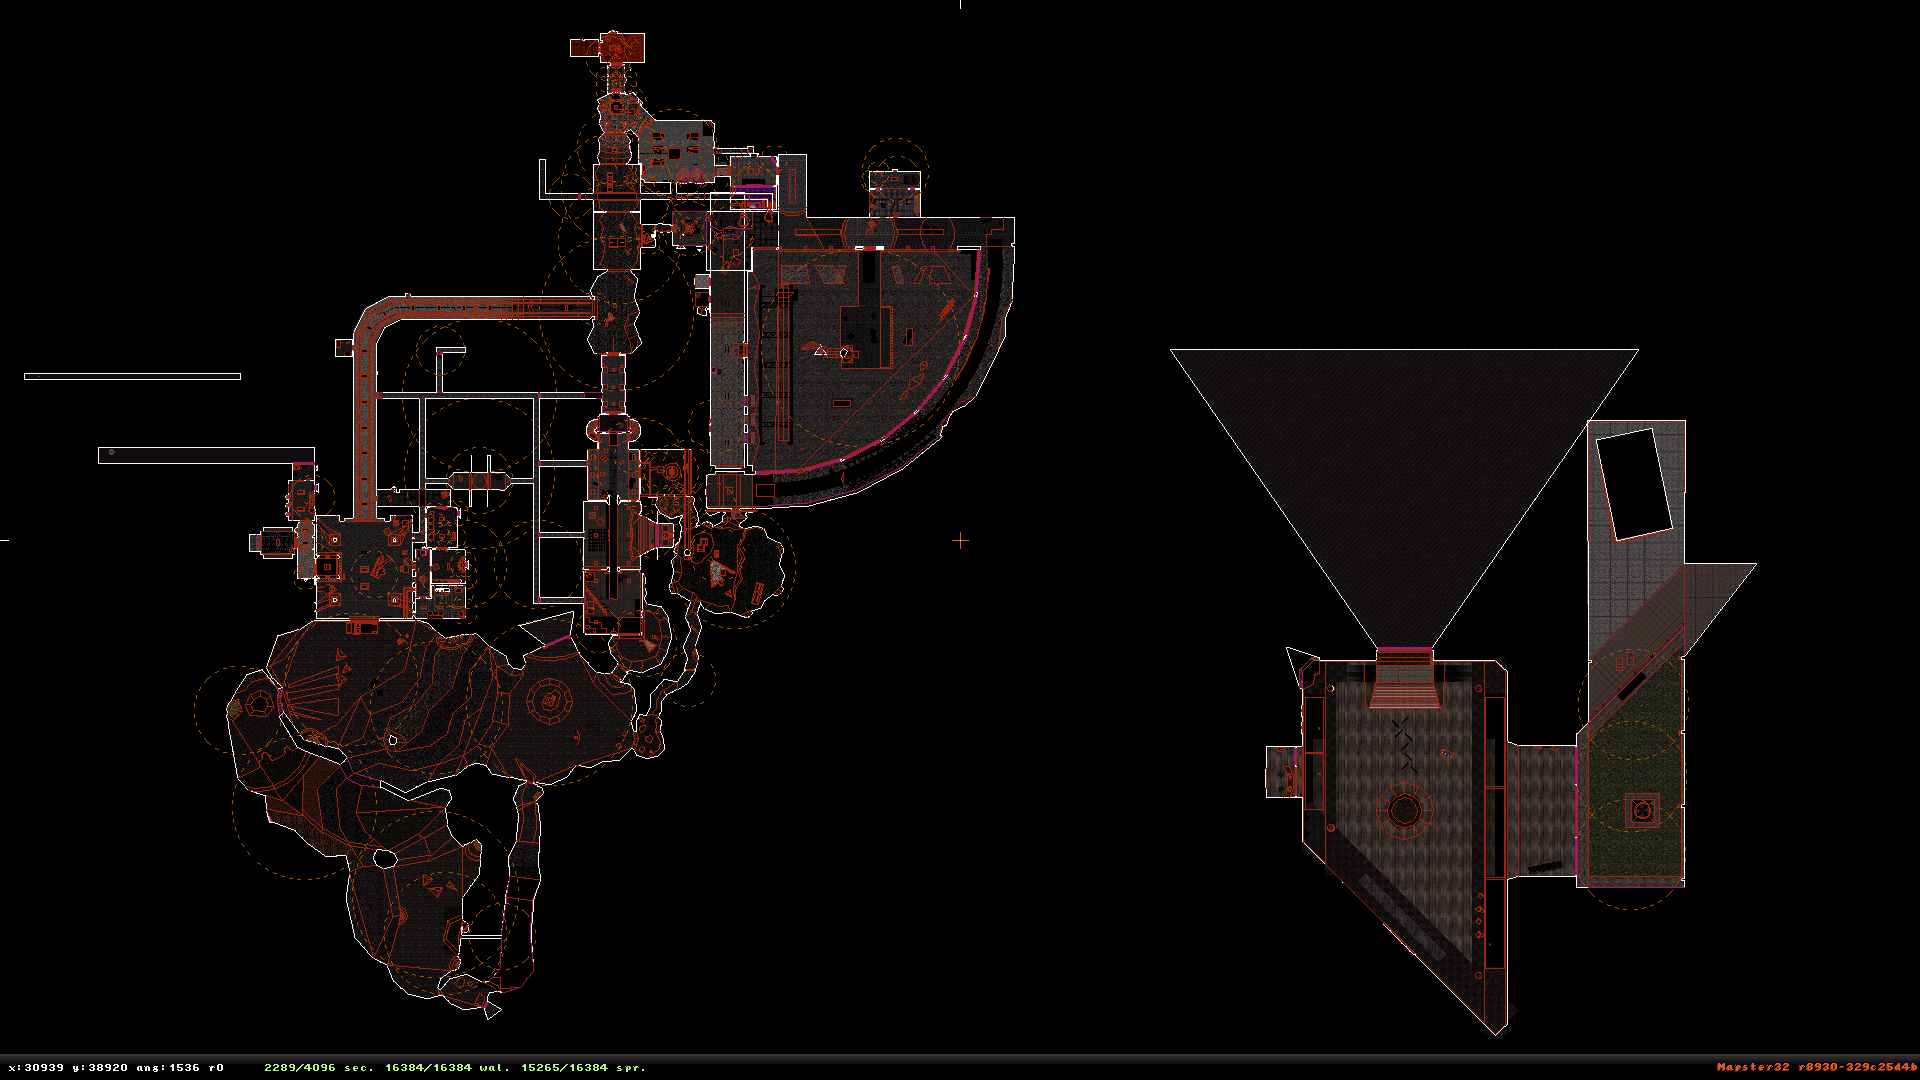 Plan view of the map in Mapster 2D mode